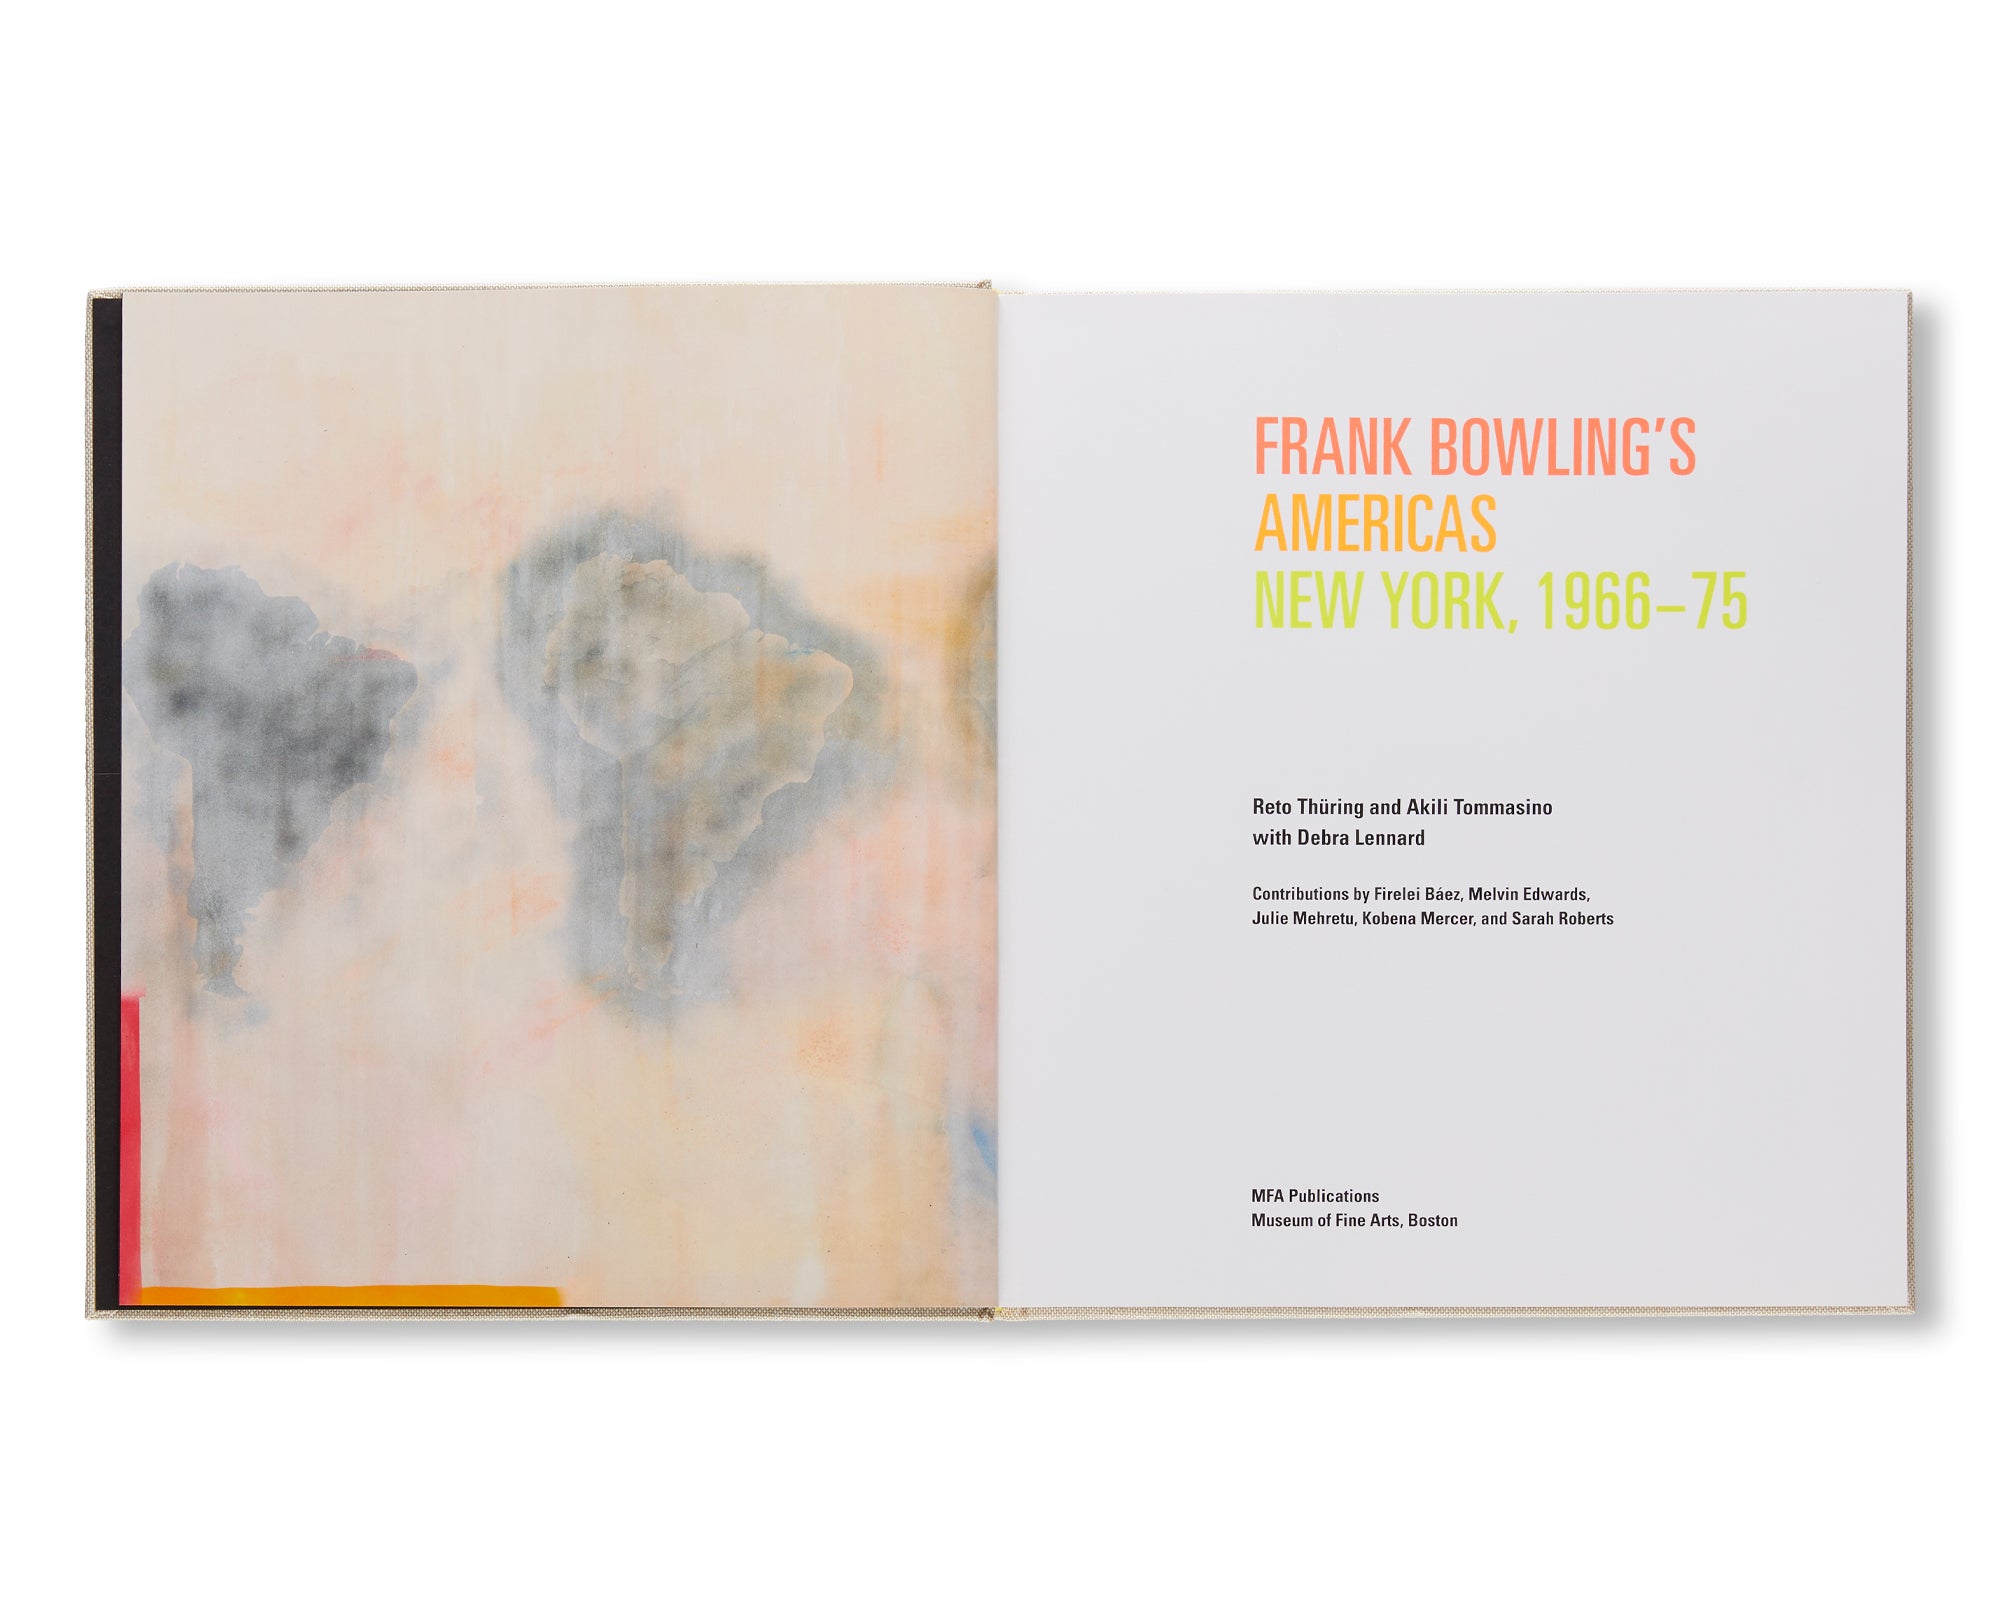 FRANK BOWLING'S AMERICAS by Frank Bowling